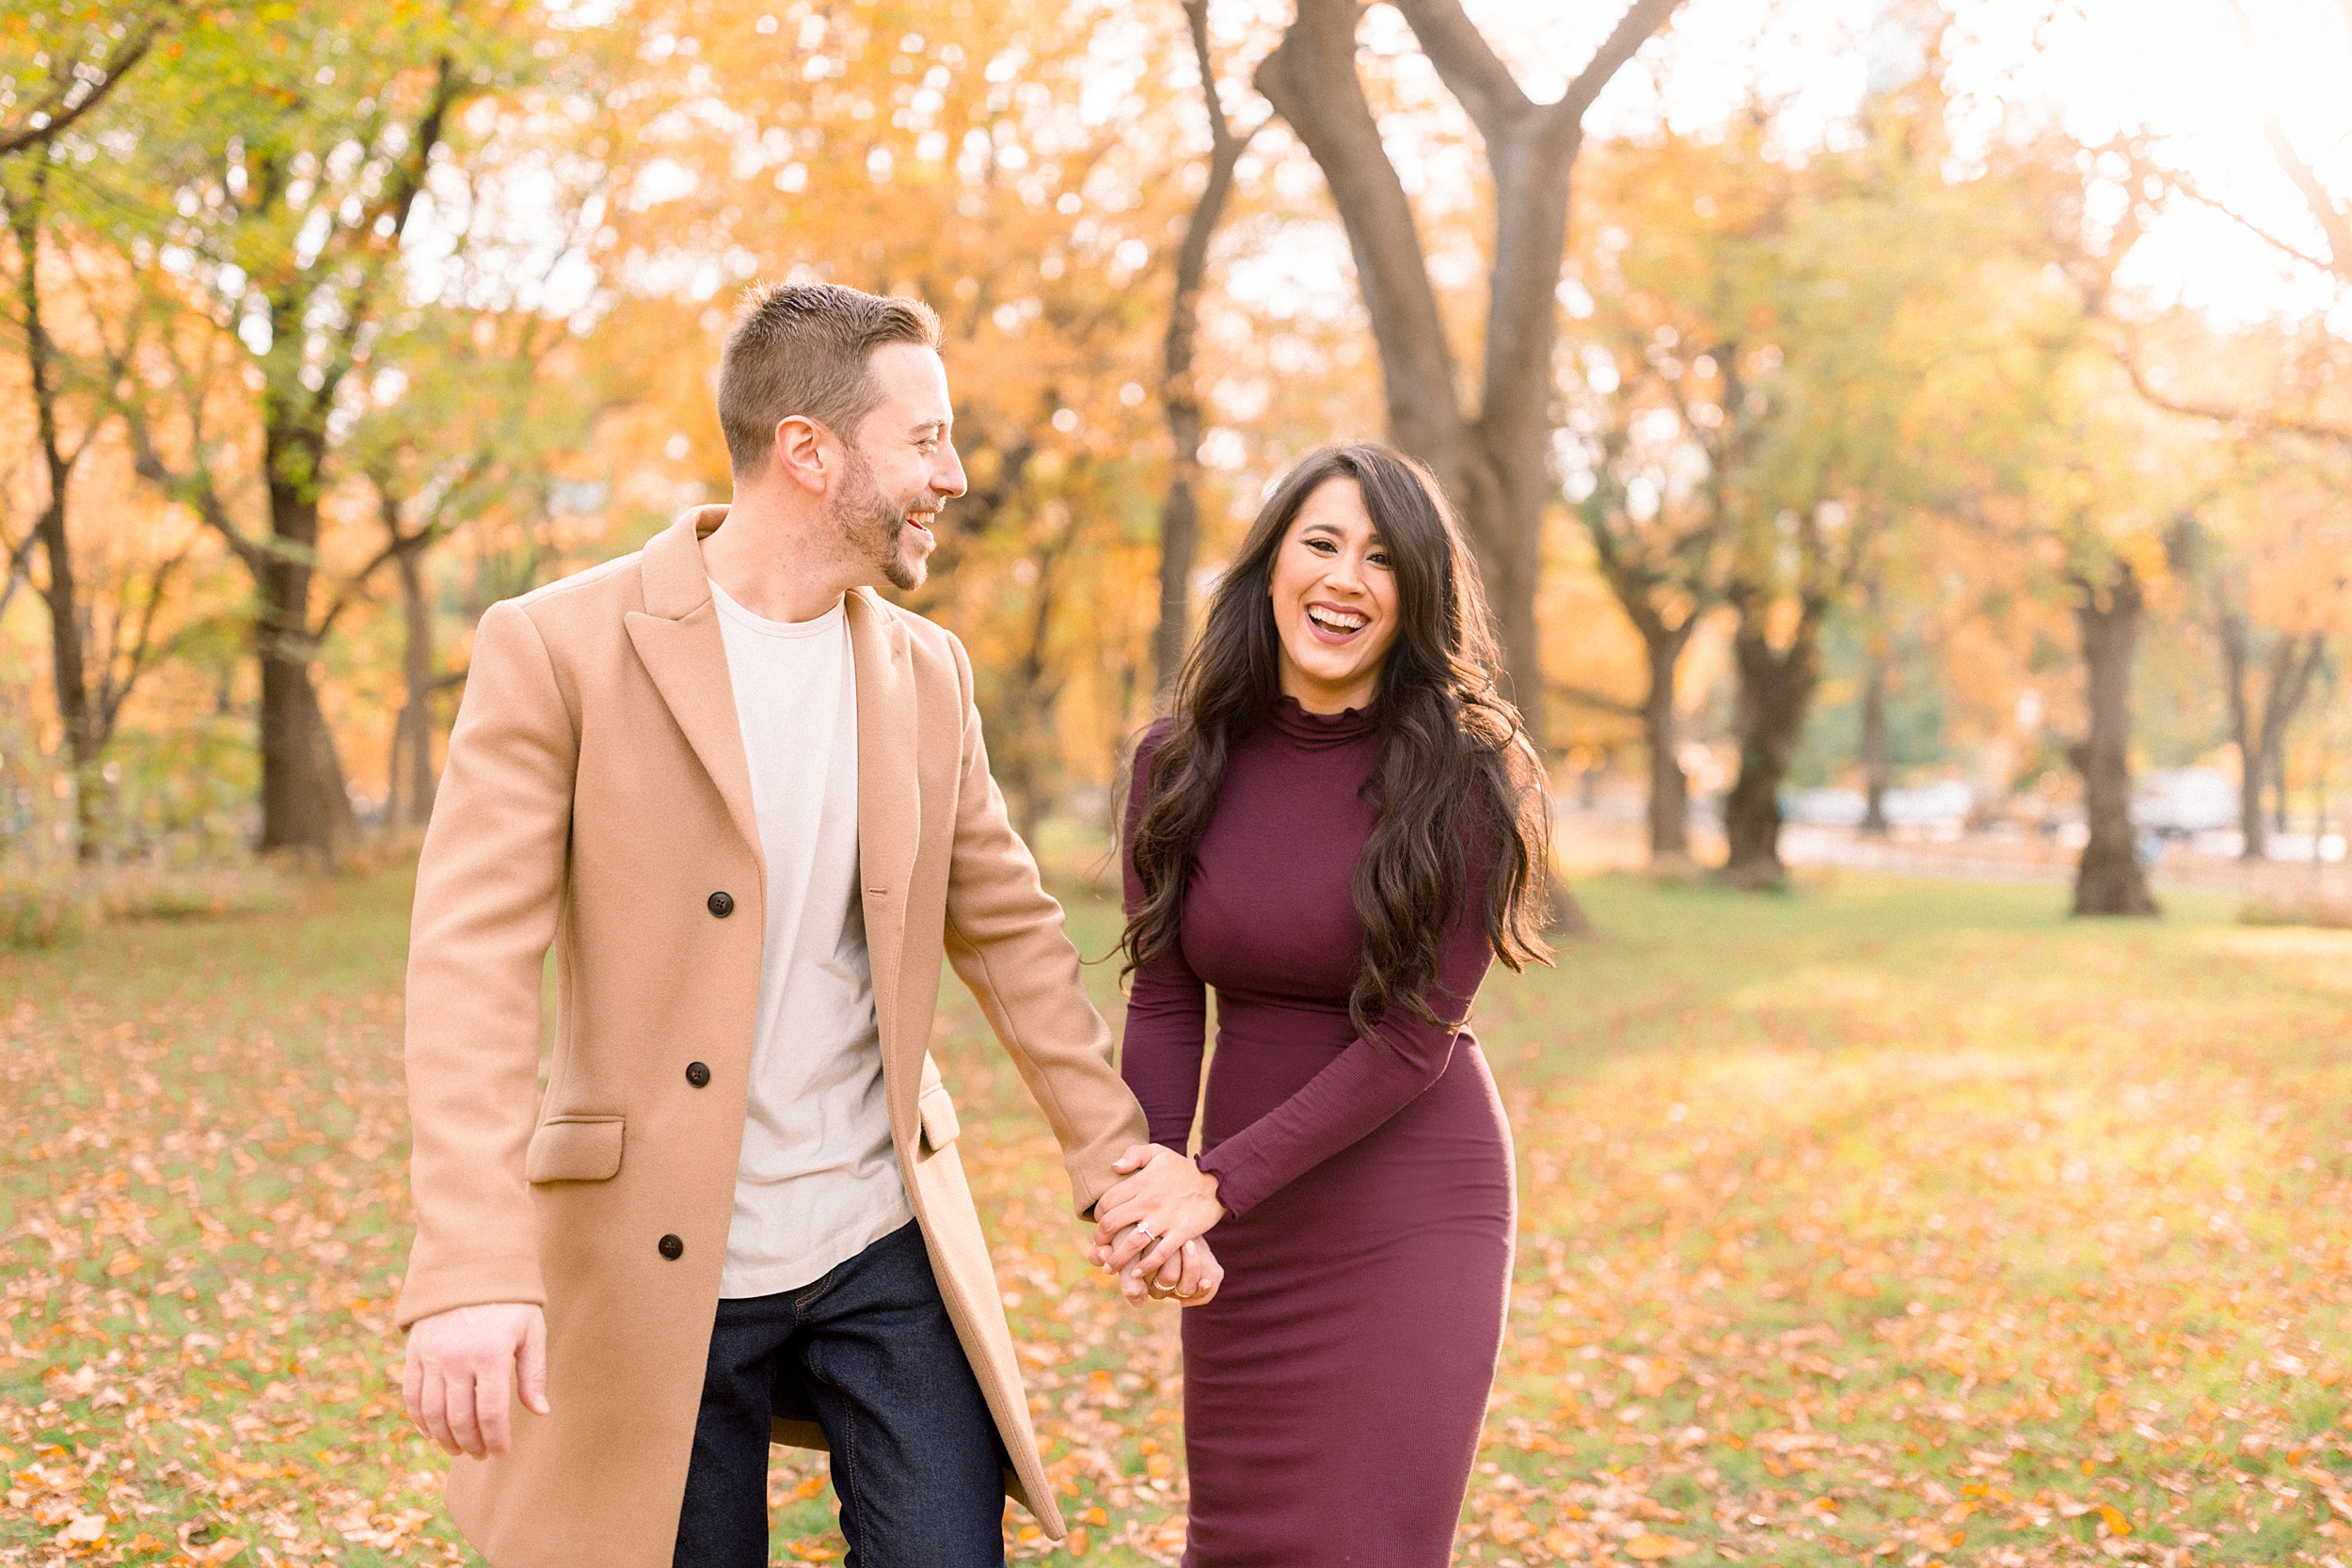 Best Time for Fall engagement photos in Central Park?